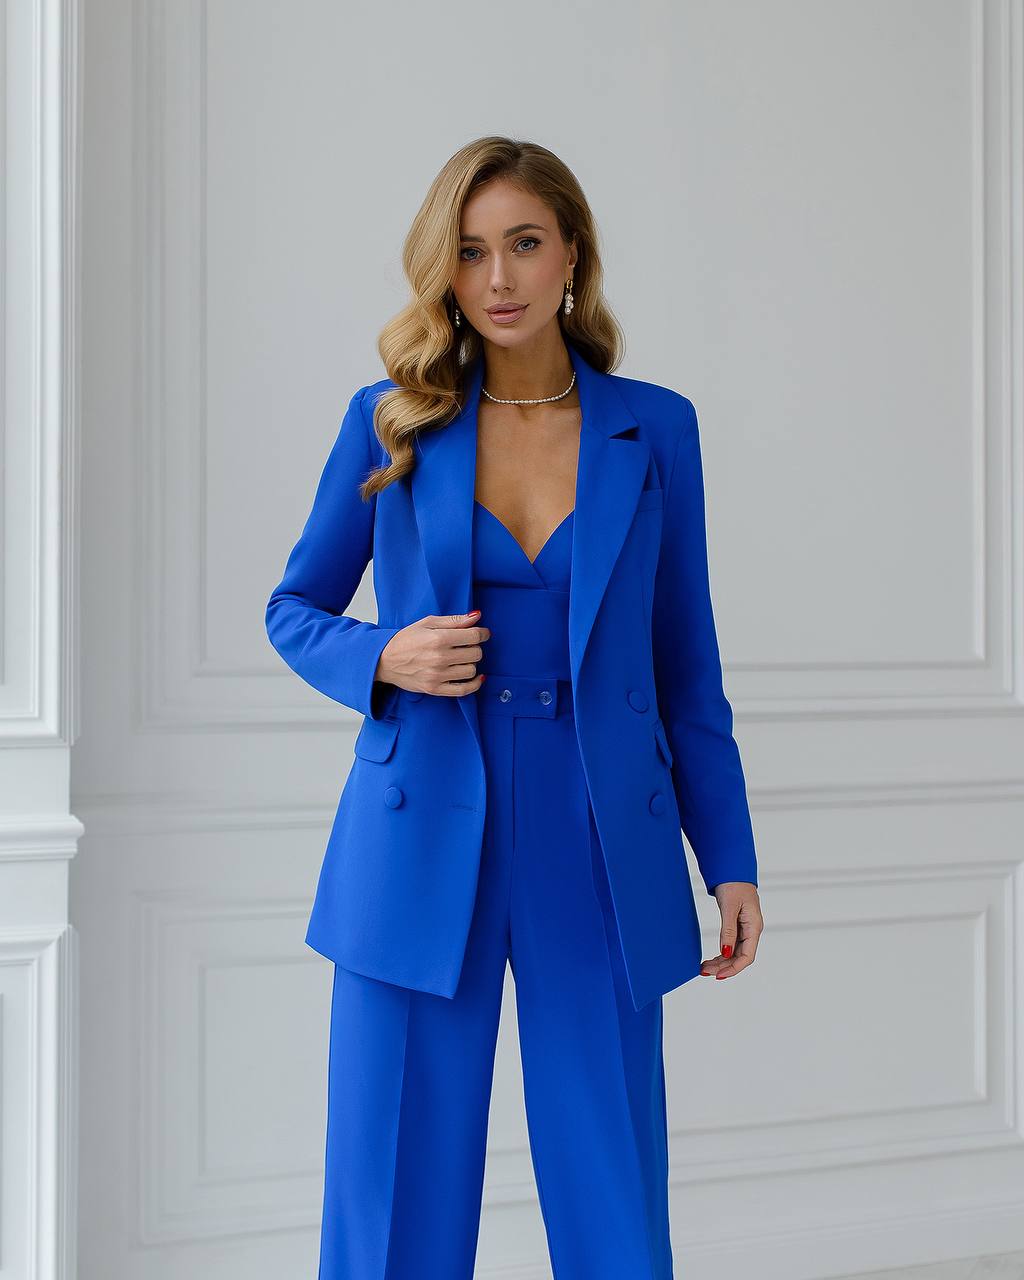 a woman in a bright blue suit stands in front of a white wall